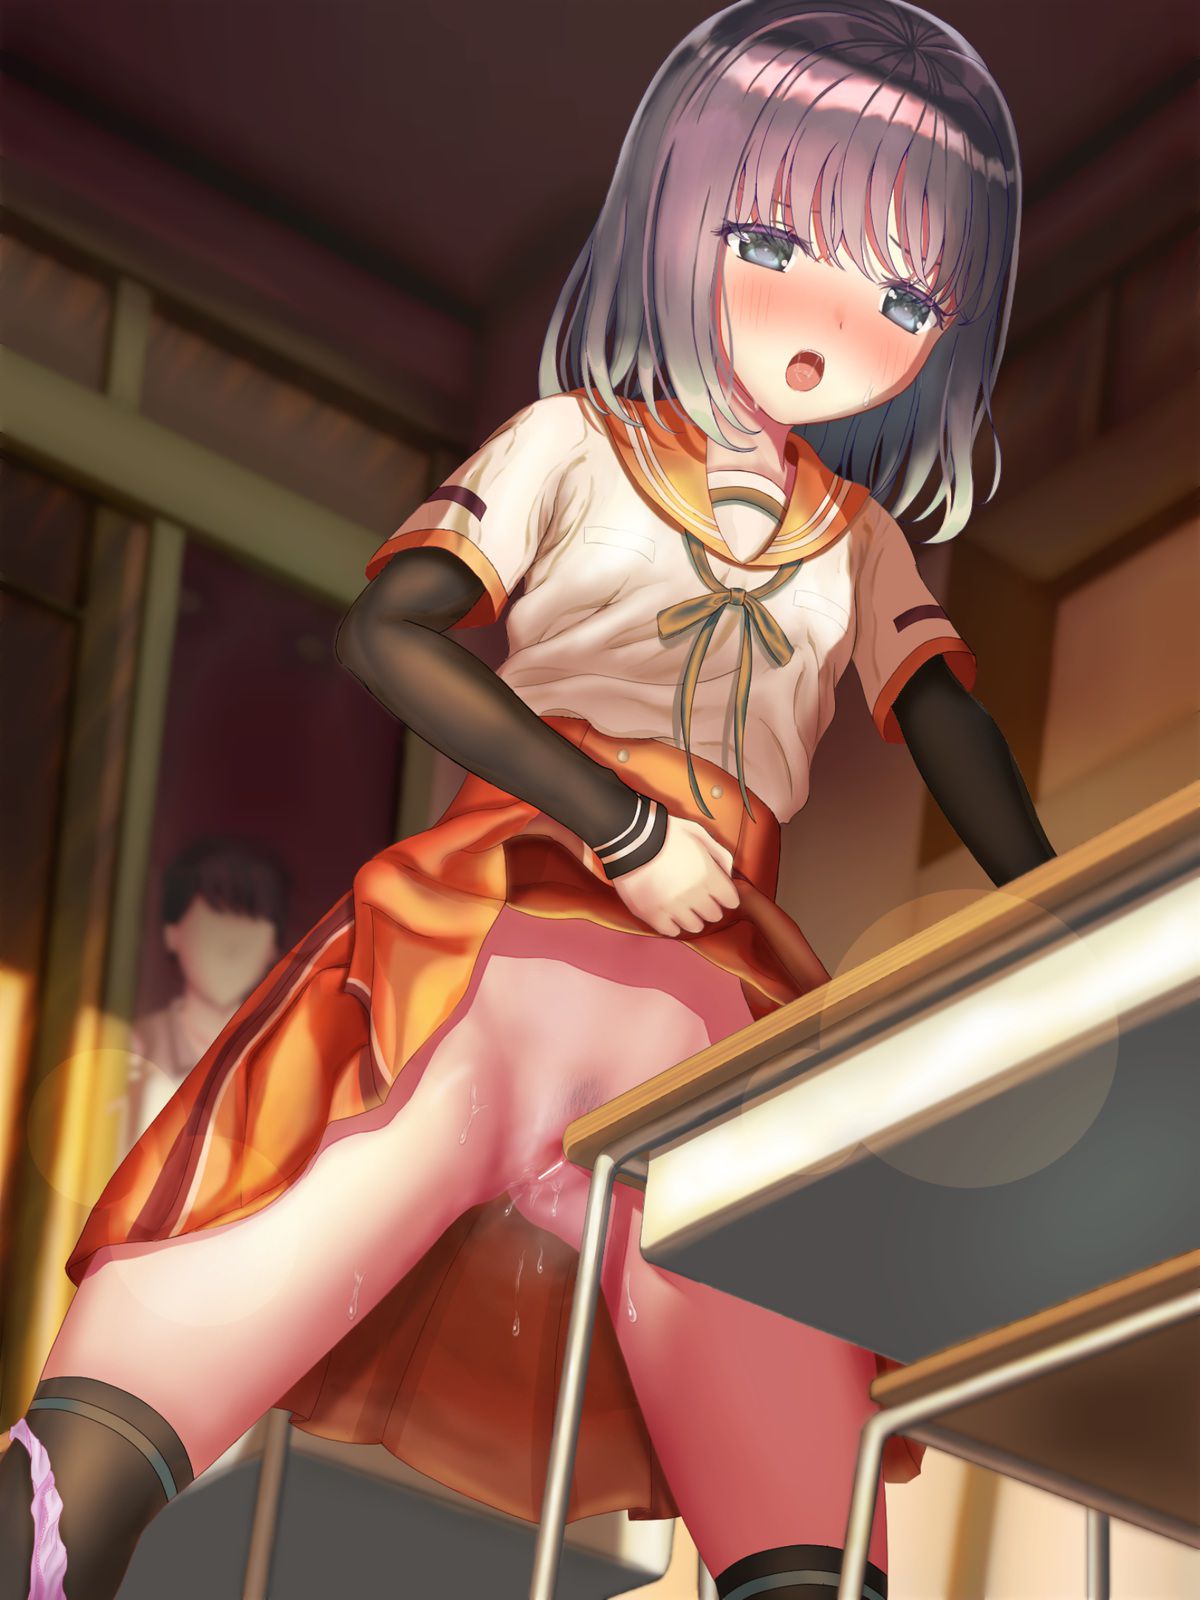 [Kaku Ona Lori Girl] Secondary erotic image of a secondary loli girl indulging in angular masturbation that she can't stand pressing her crotch against the desk 45